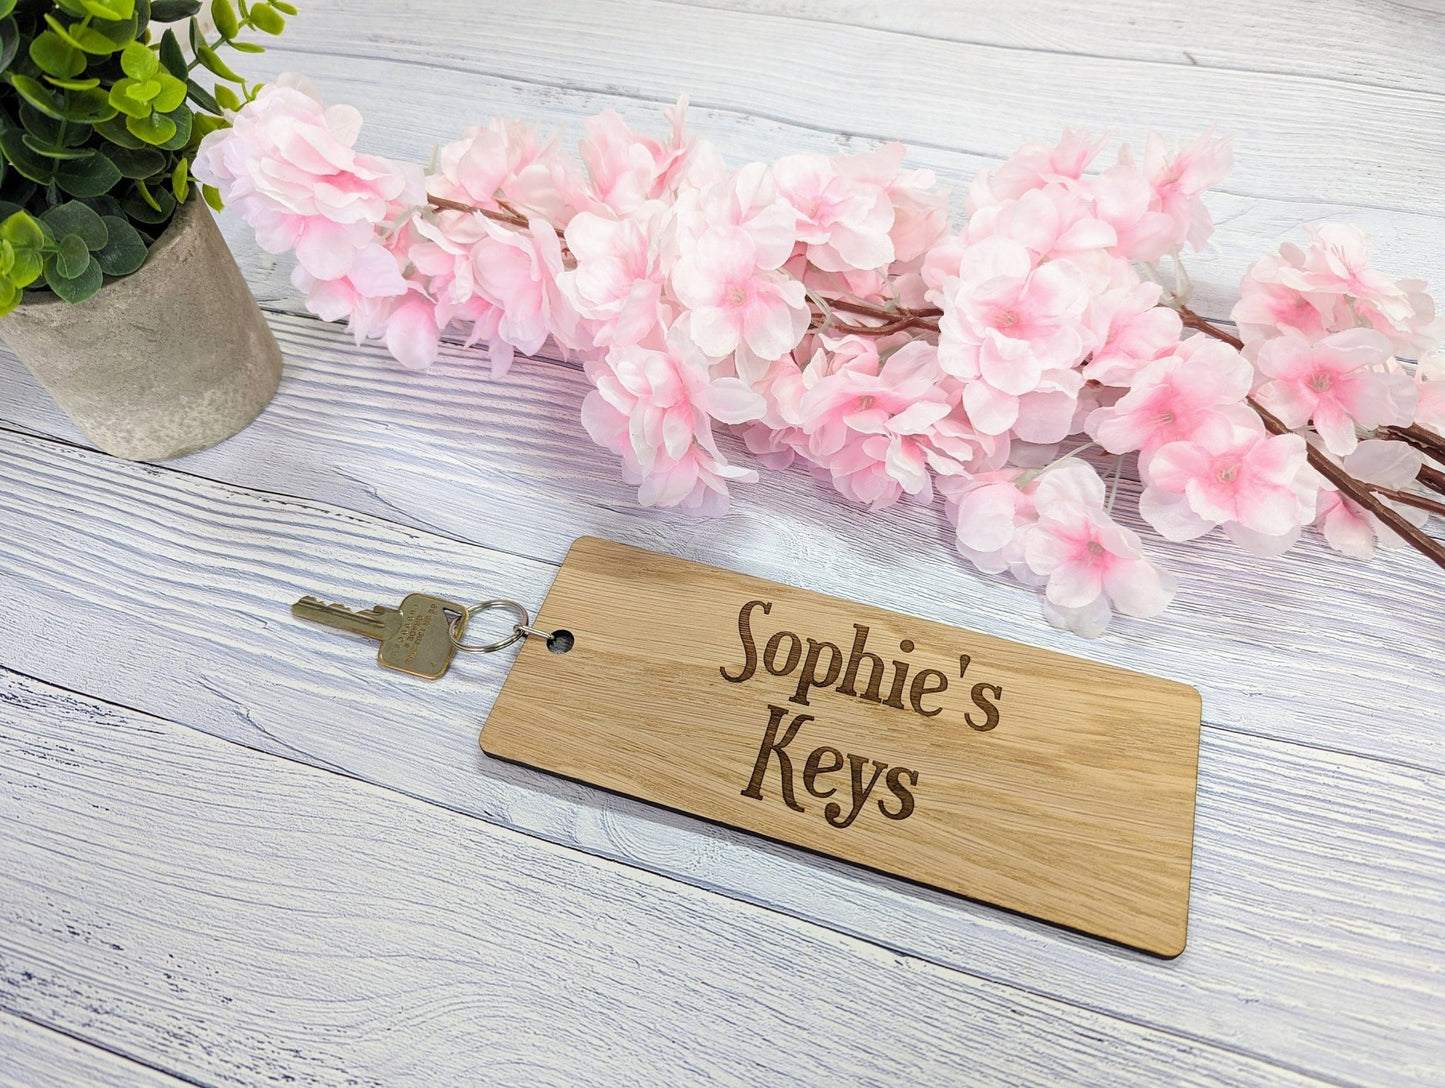 Extra-Large 200x80mm Personalised Wooden Keyring - Ideal for First Car, New Home, or Those Who Misplace Keys - CherryGroveCraft